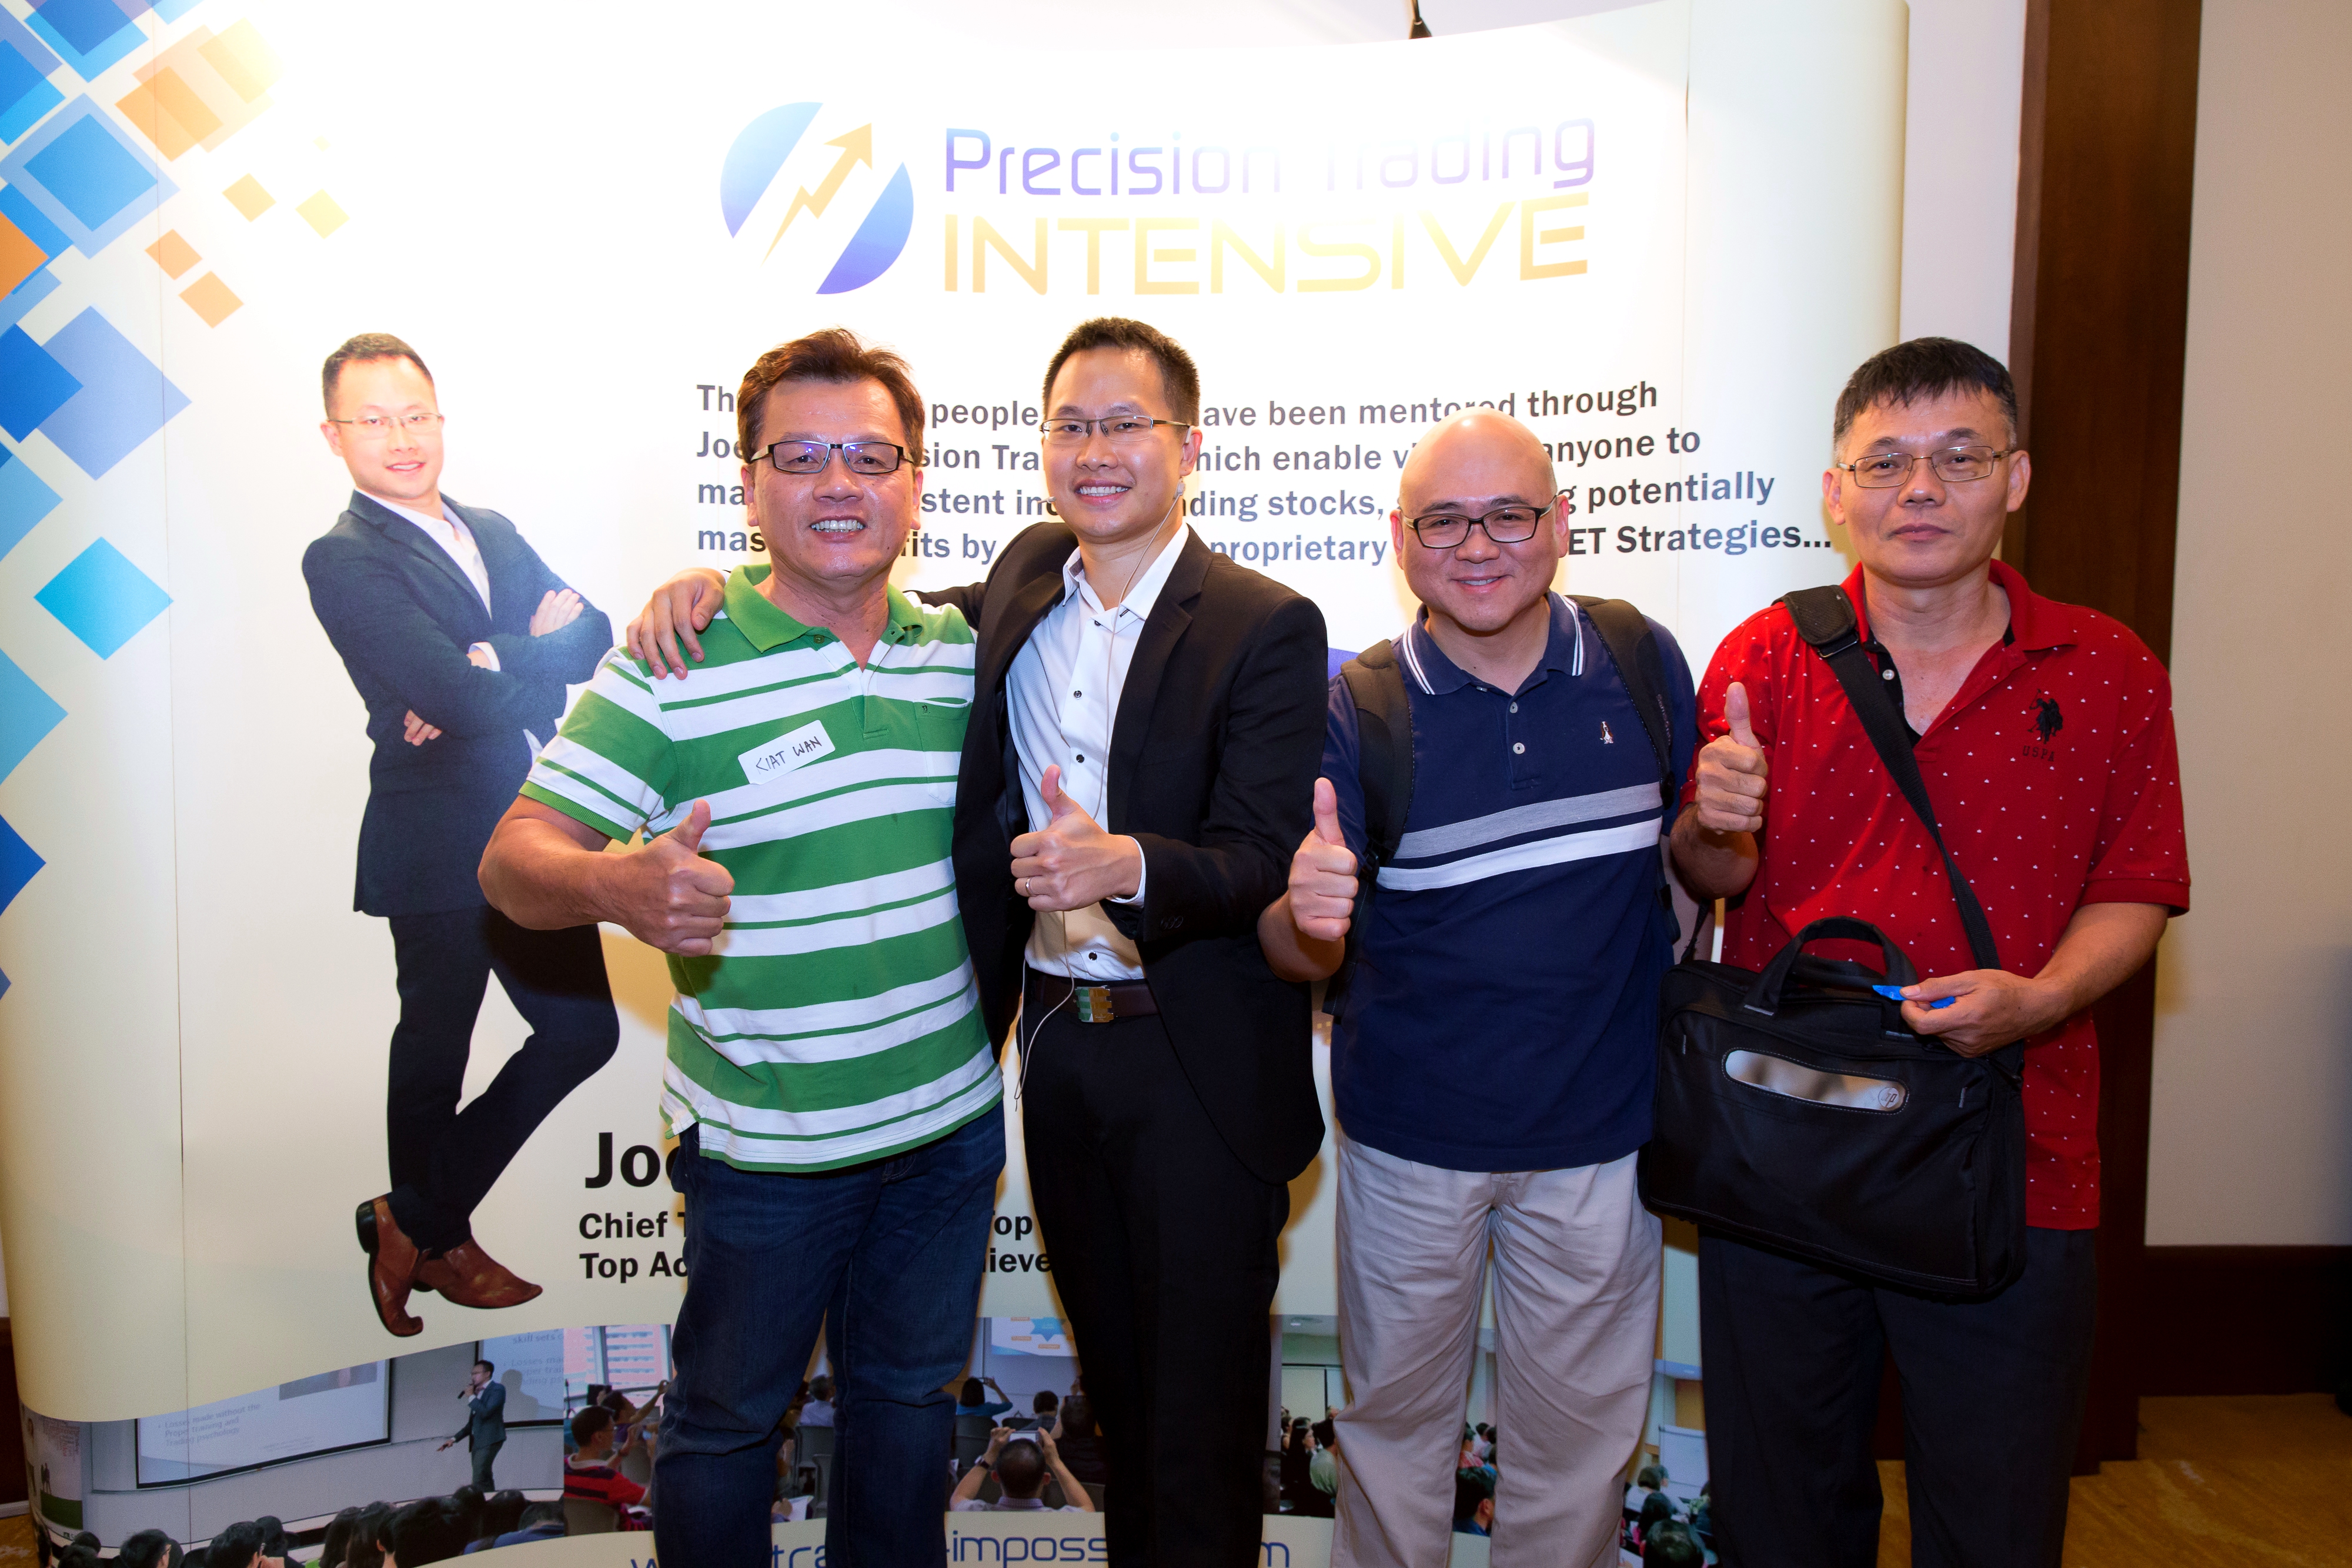 Joey Choy at Precision Trading Intensive